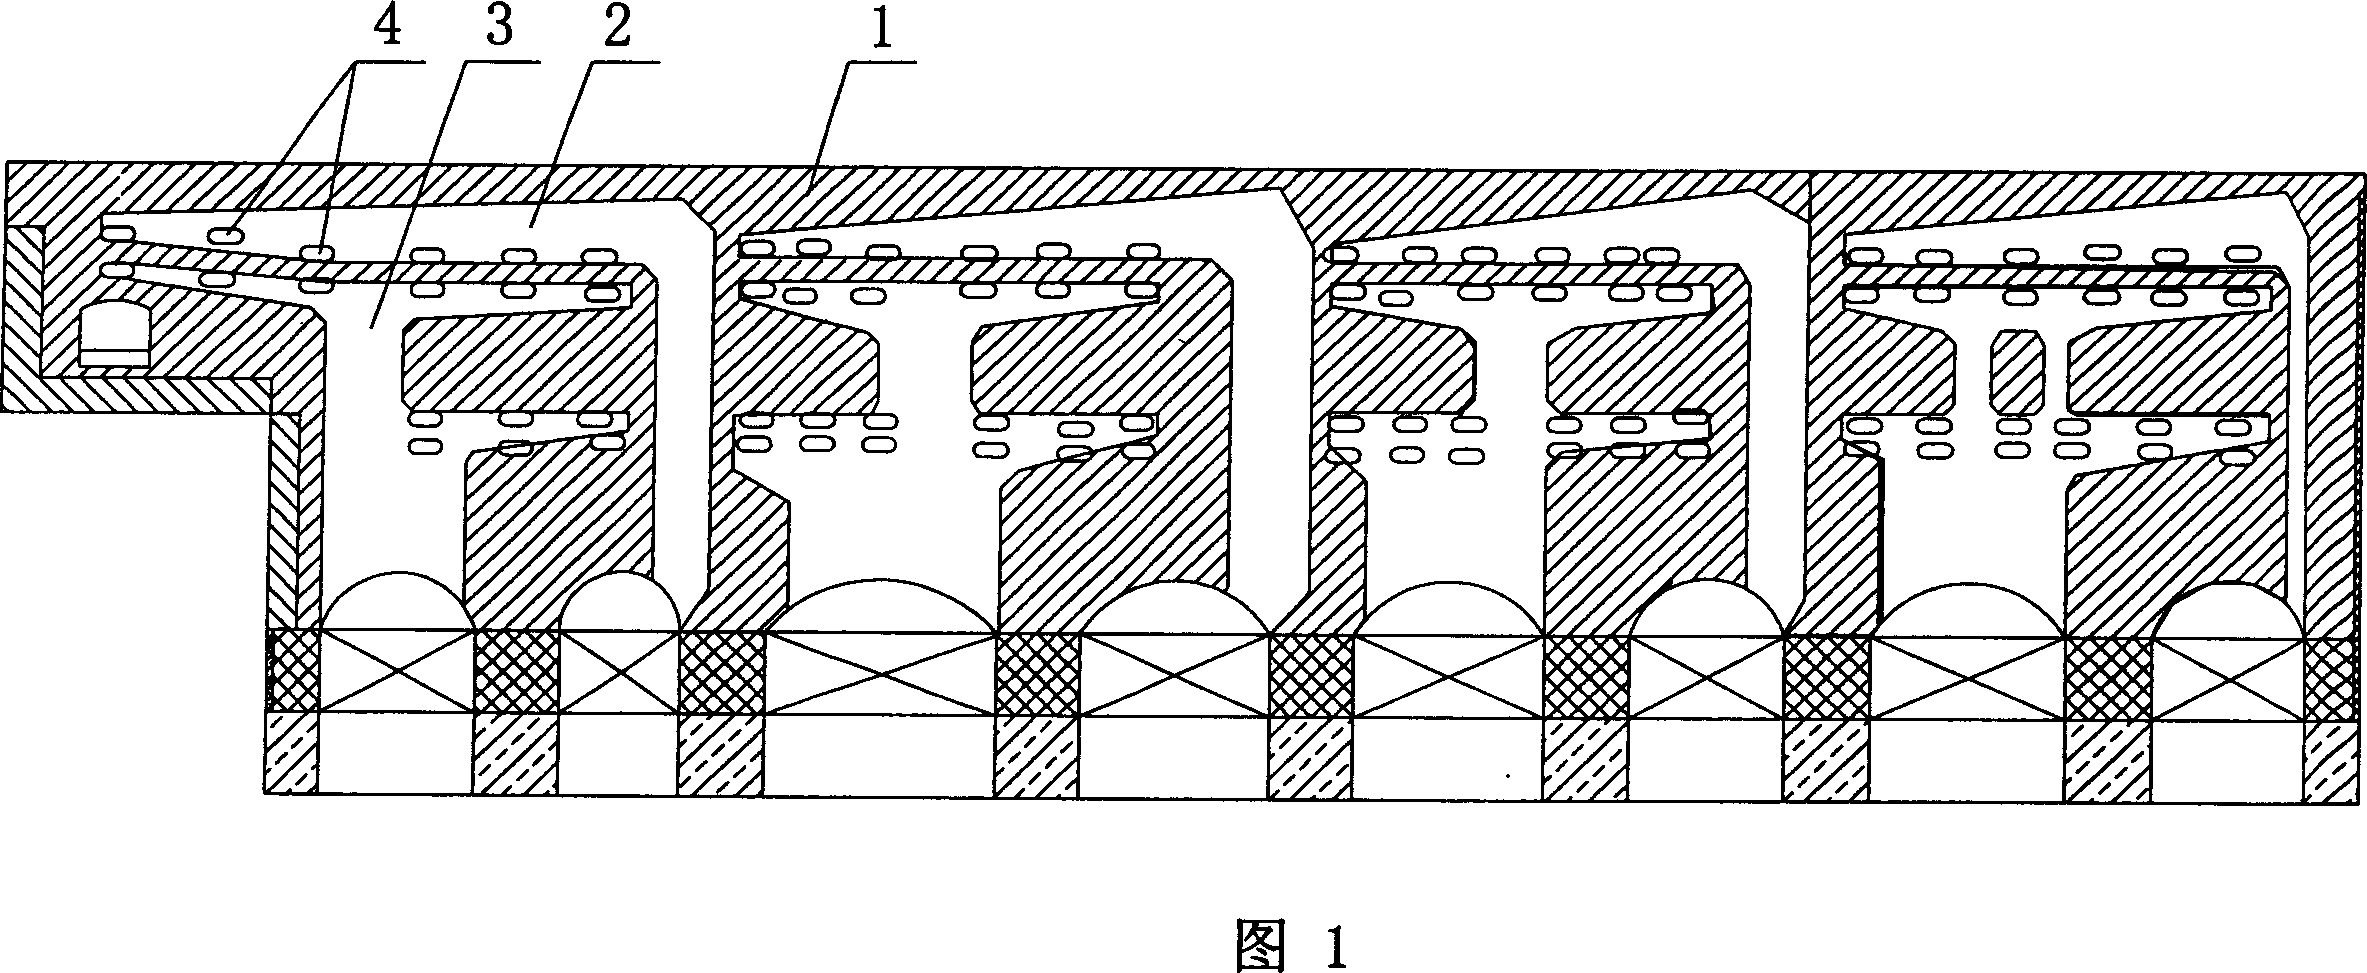 Construction method for burner, air channels, gas flues inside furnace wall of heating furnace in heat storage type